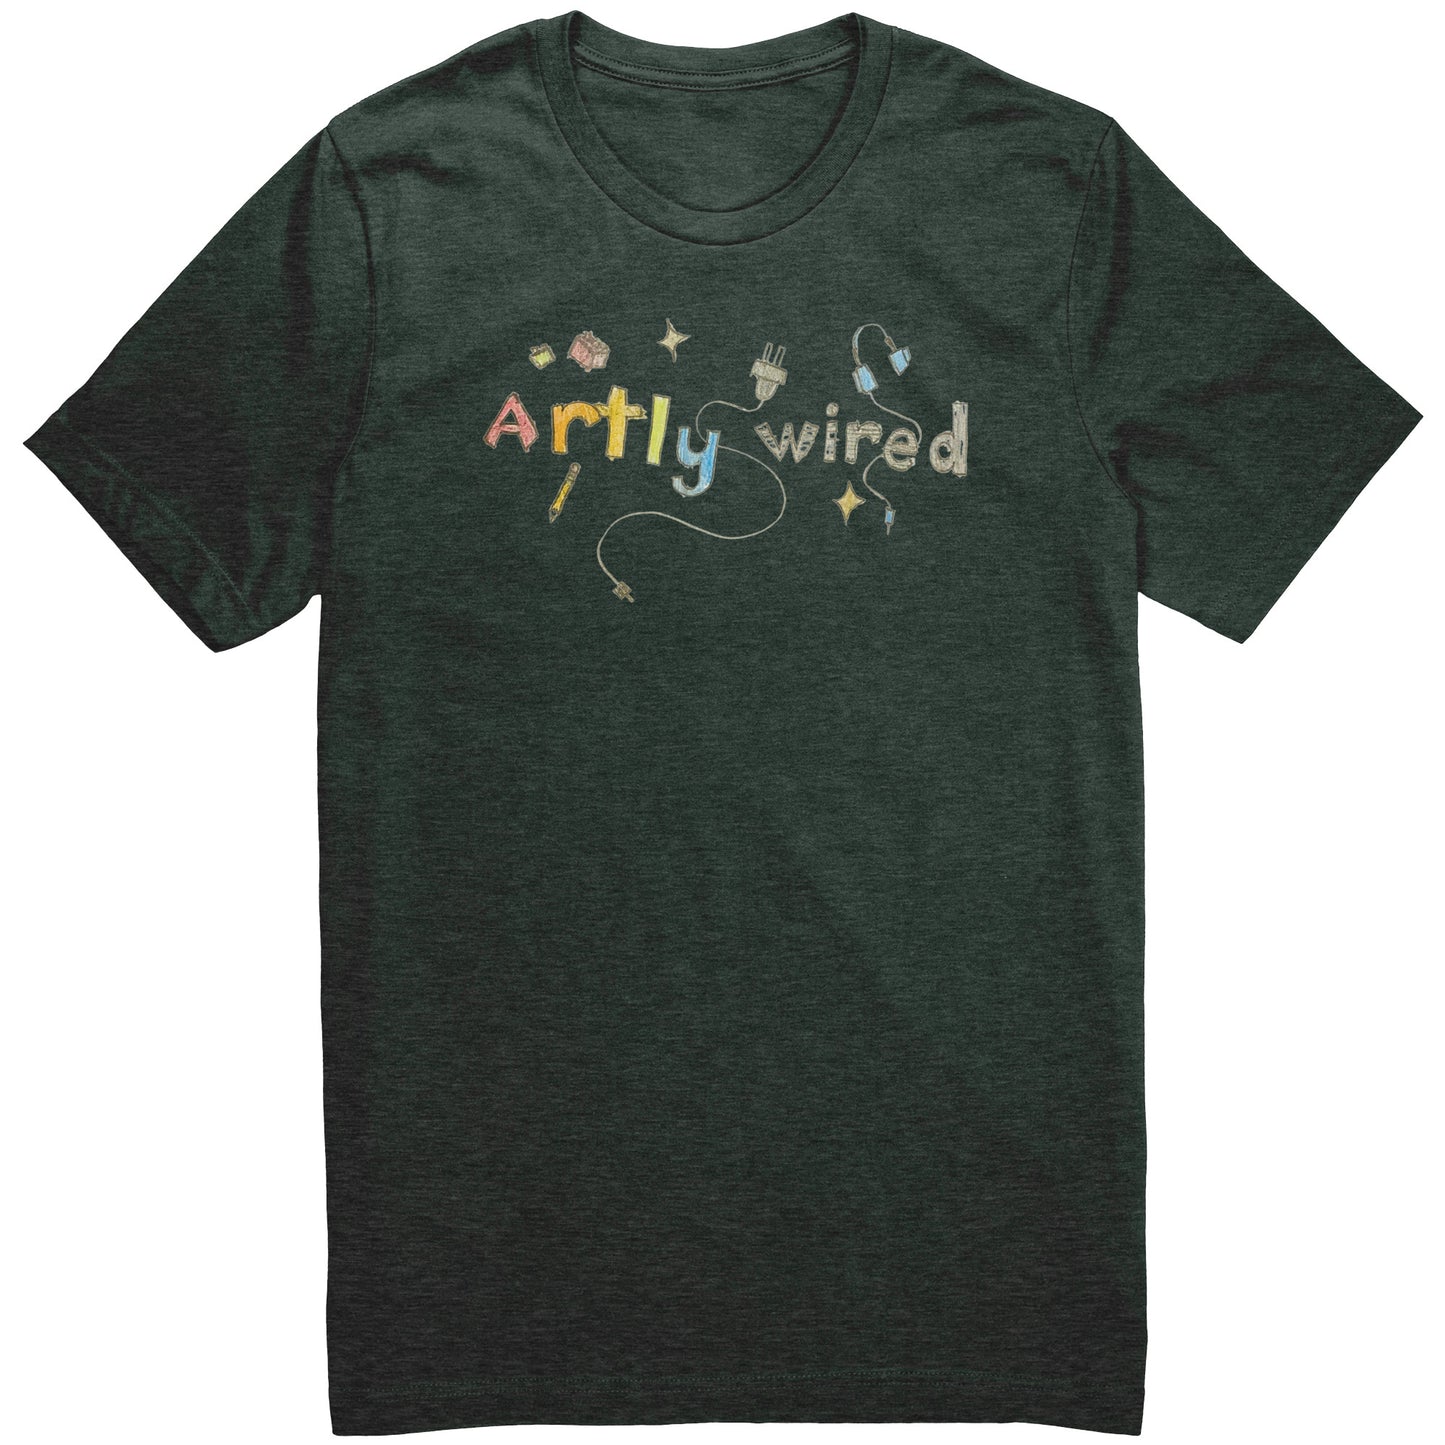 Artly Wired Unisex Adult T-Shirt